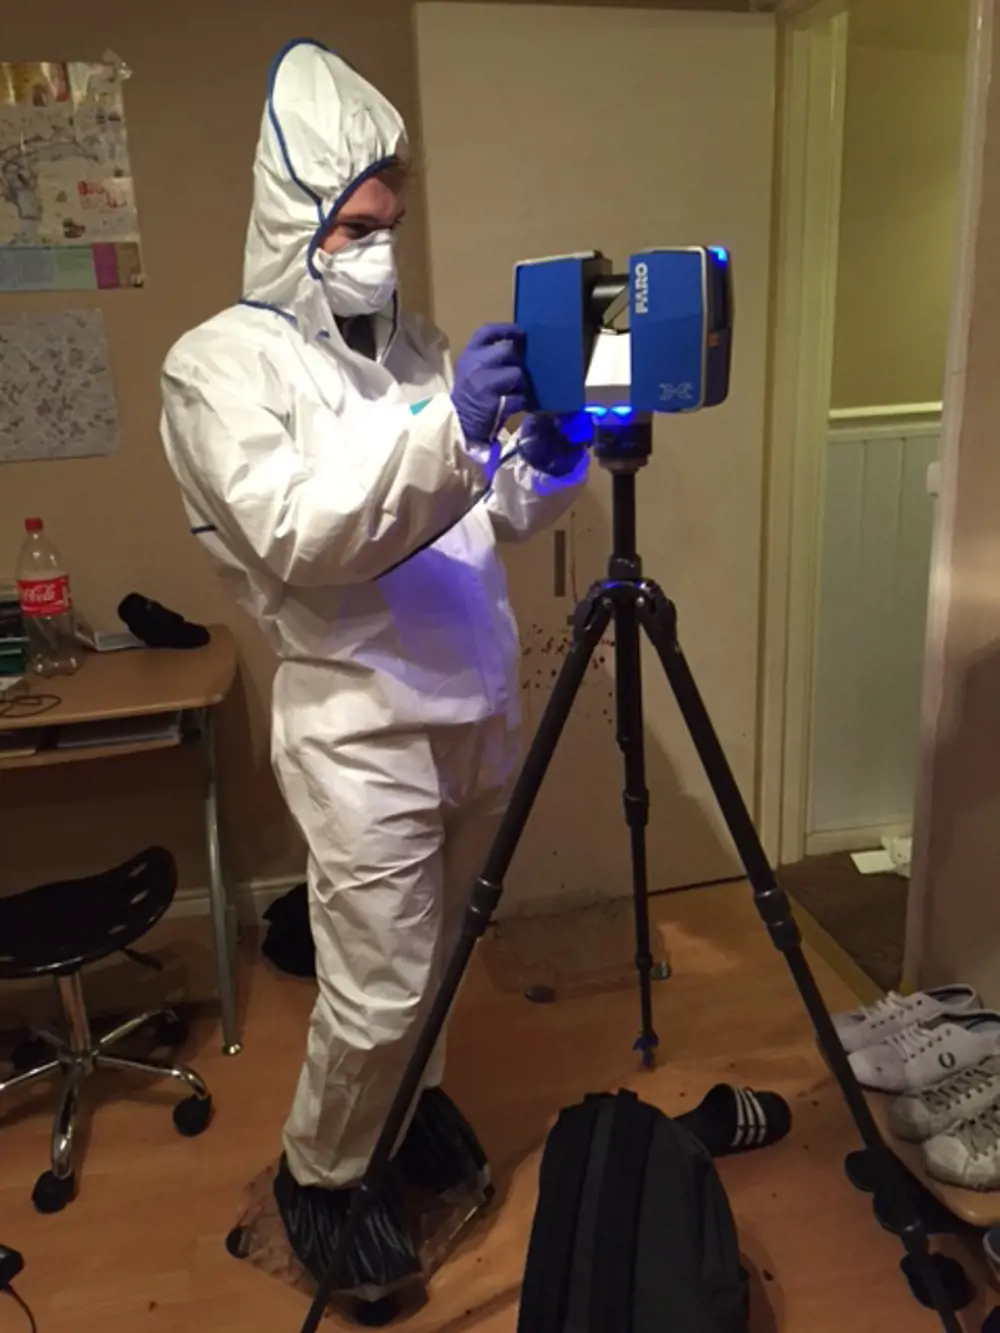 A person wearing a protective suit and mask adjusting a scene scanner in a room.